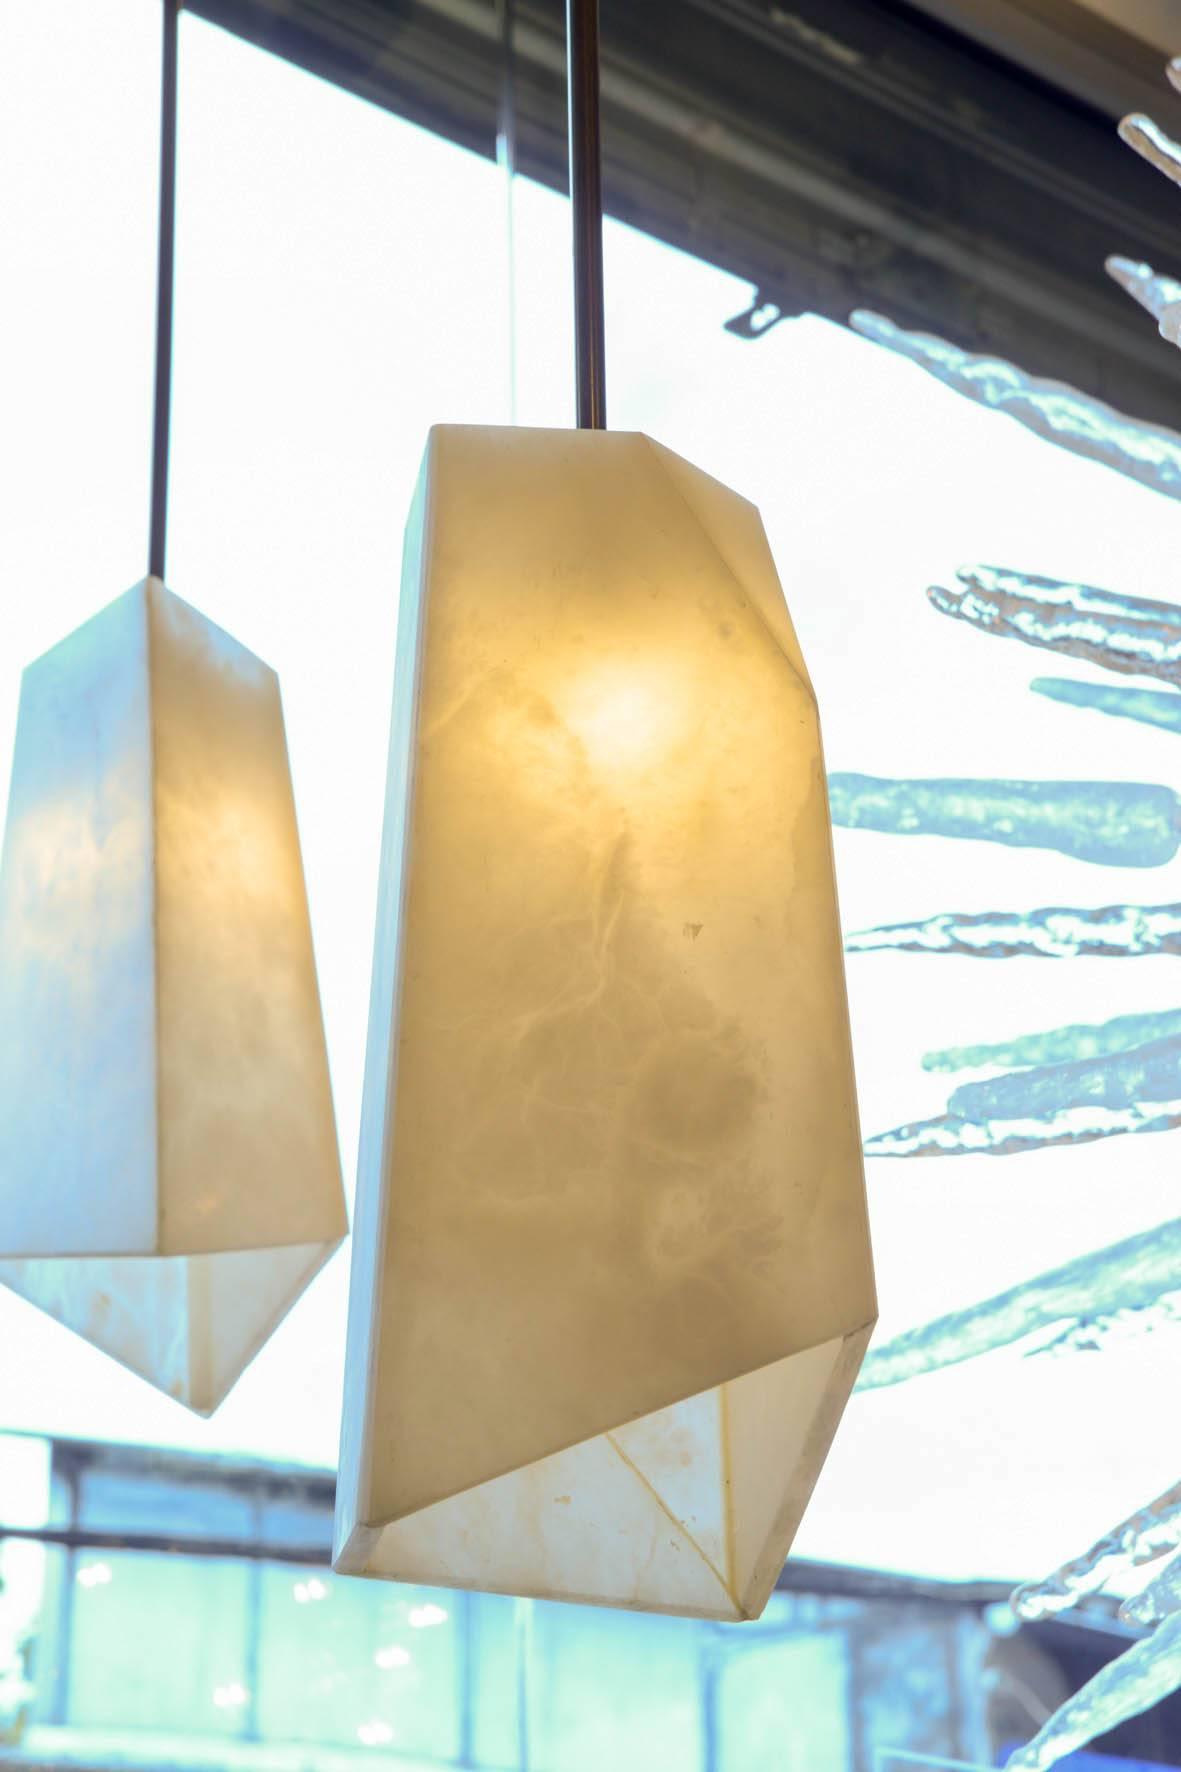 New design by Glustin Luminaires, asymmetrical suspensions made of different plates of alabaster put together hold by a brass stem.